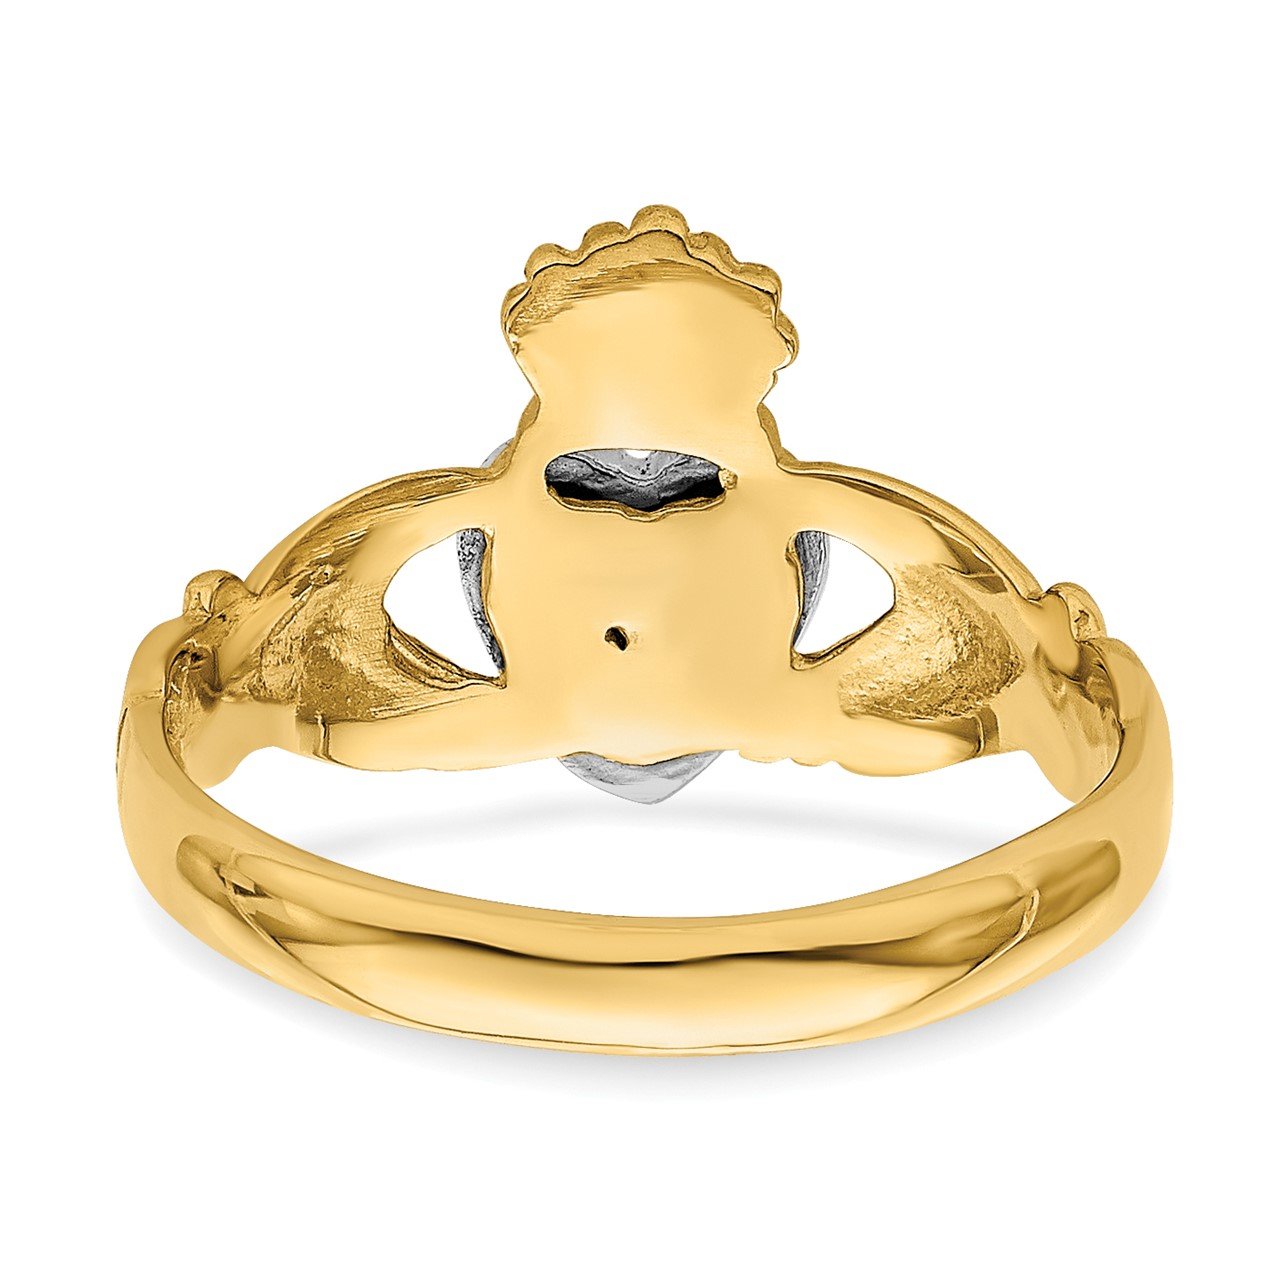 14k TT Yellow and White Gold Baby Claddagh Ring (Development)-5